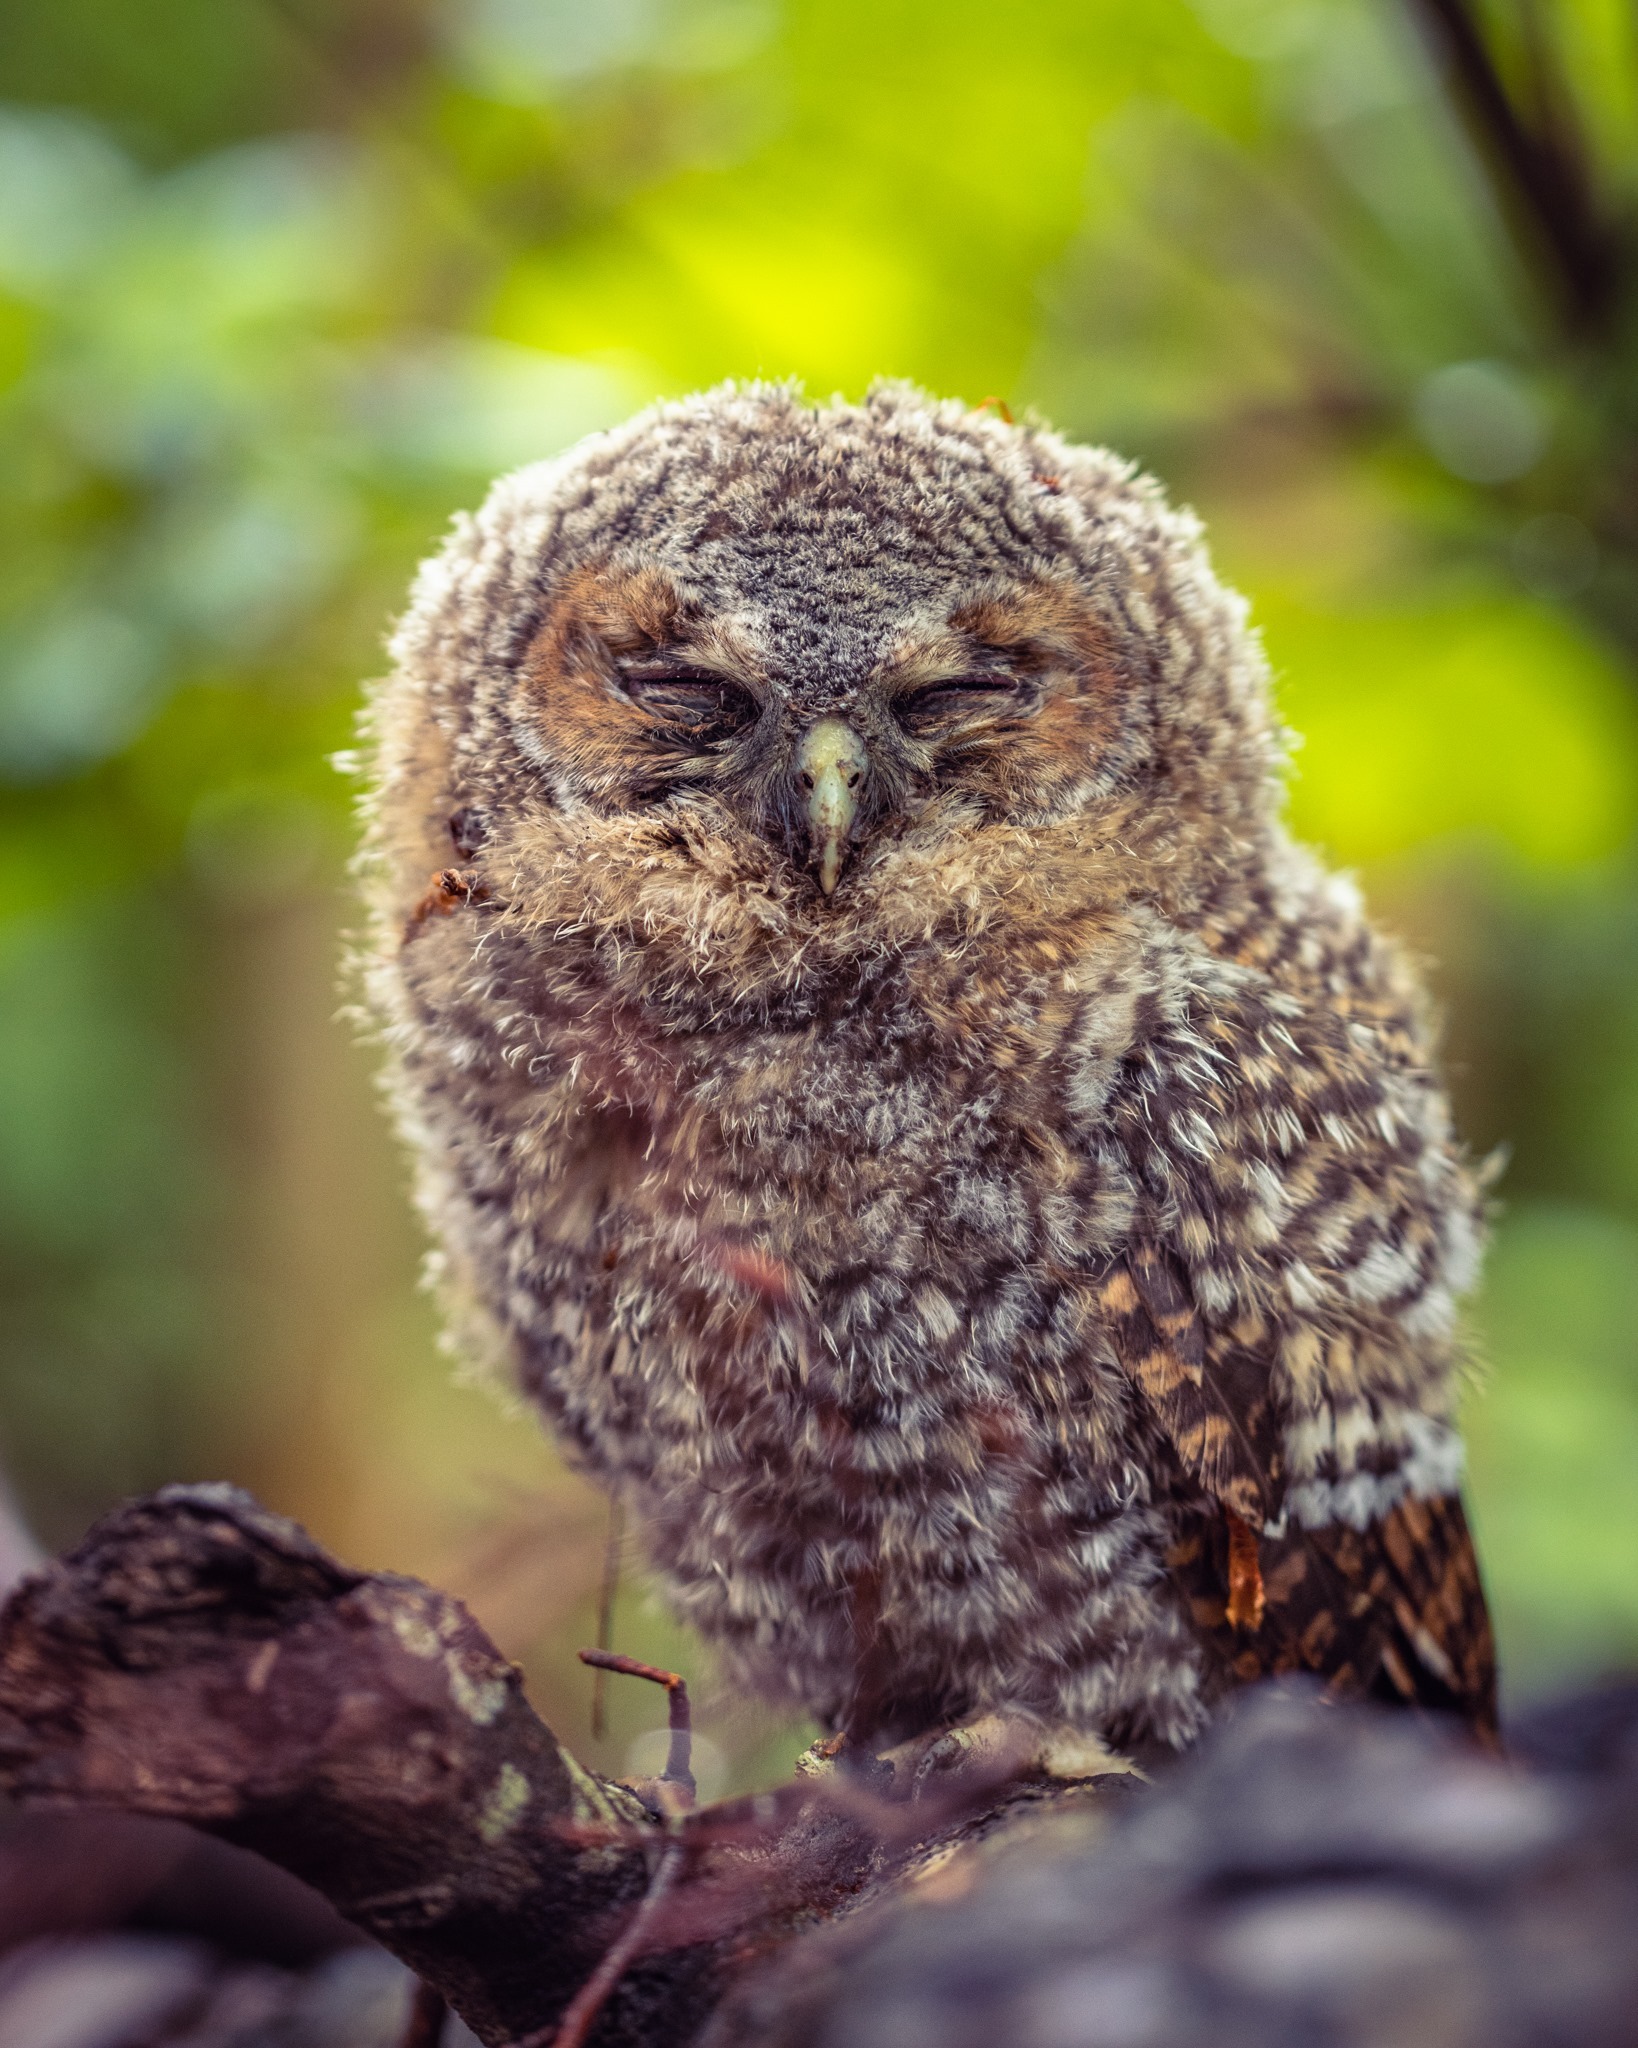 James Ratchford was lucky enough to see a baby tawny owl By James Ratchford